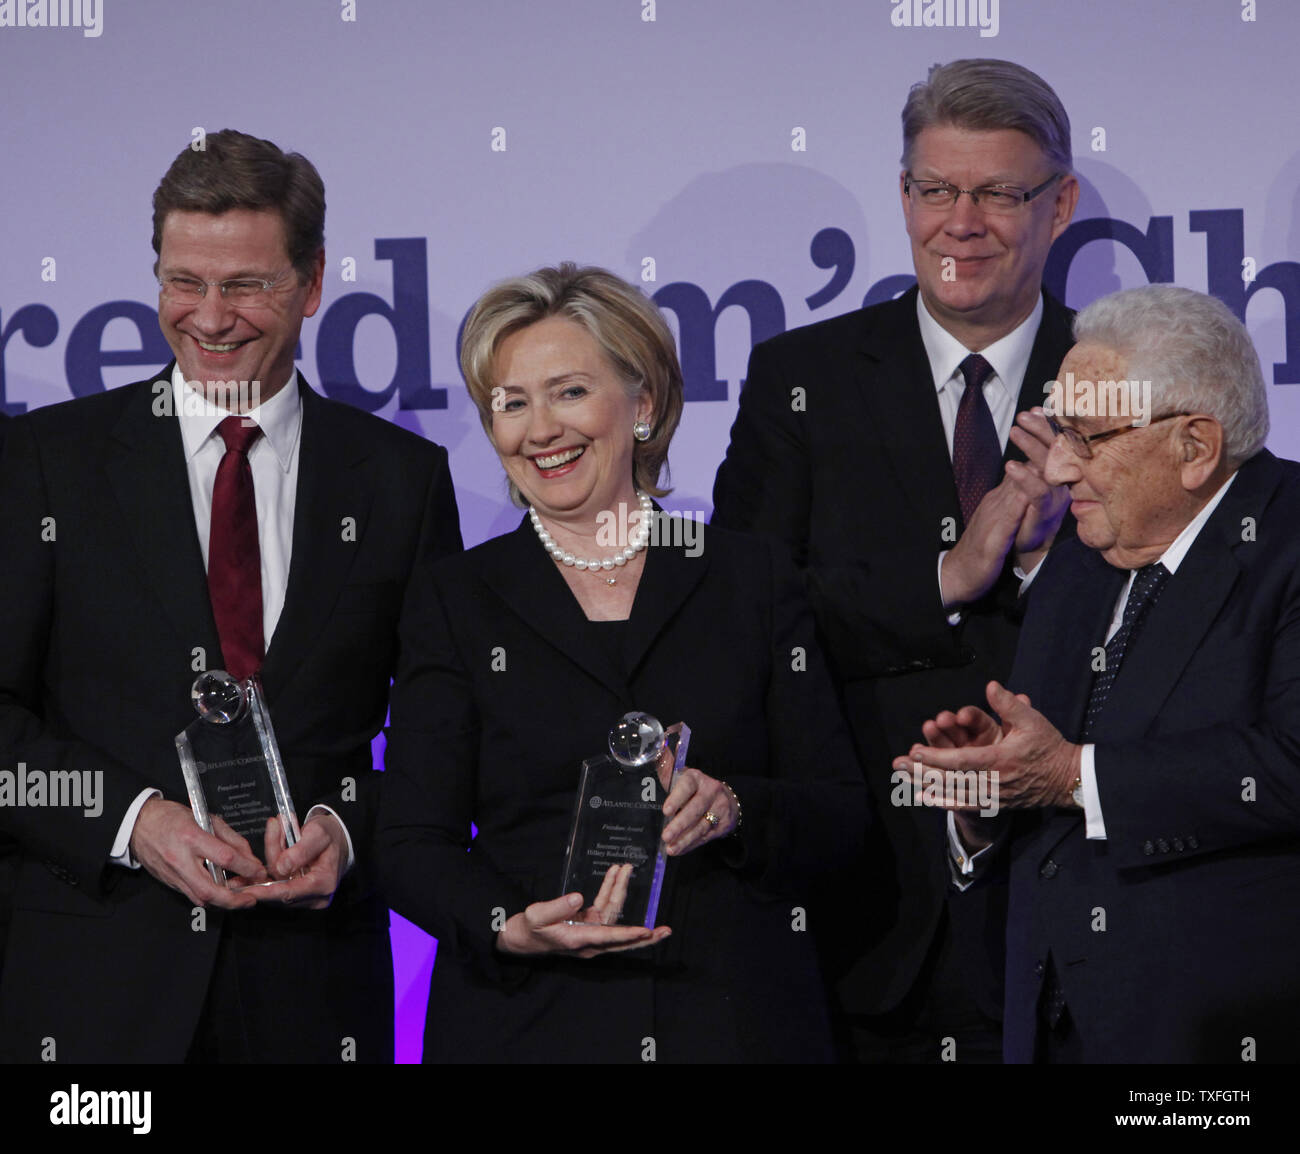 (From L to R) German Foreign Minister Dr. Guido Westerwelle, U.S. Secretary of State Hillary Clinton, Atlantic Council President and CEO Frederick Kempe and former U.S. Secretary of State Dr. Henry Kissinger receive applause from the audience after the Freedom Challenge Dinner in Berlin on November 8, 2009.  Clinton and Westerwelle received the awards which recognizes individuals who have fought for democracy and liberty.  The event was held in conjunction with the 20th anniversary of the fall of the Berlin Wall which will be celebrated on November 9 in the German capital.   UPI/David Silpa Stock Photo